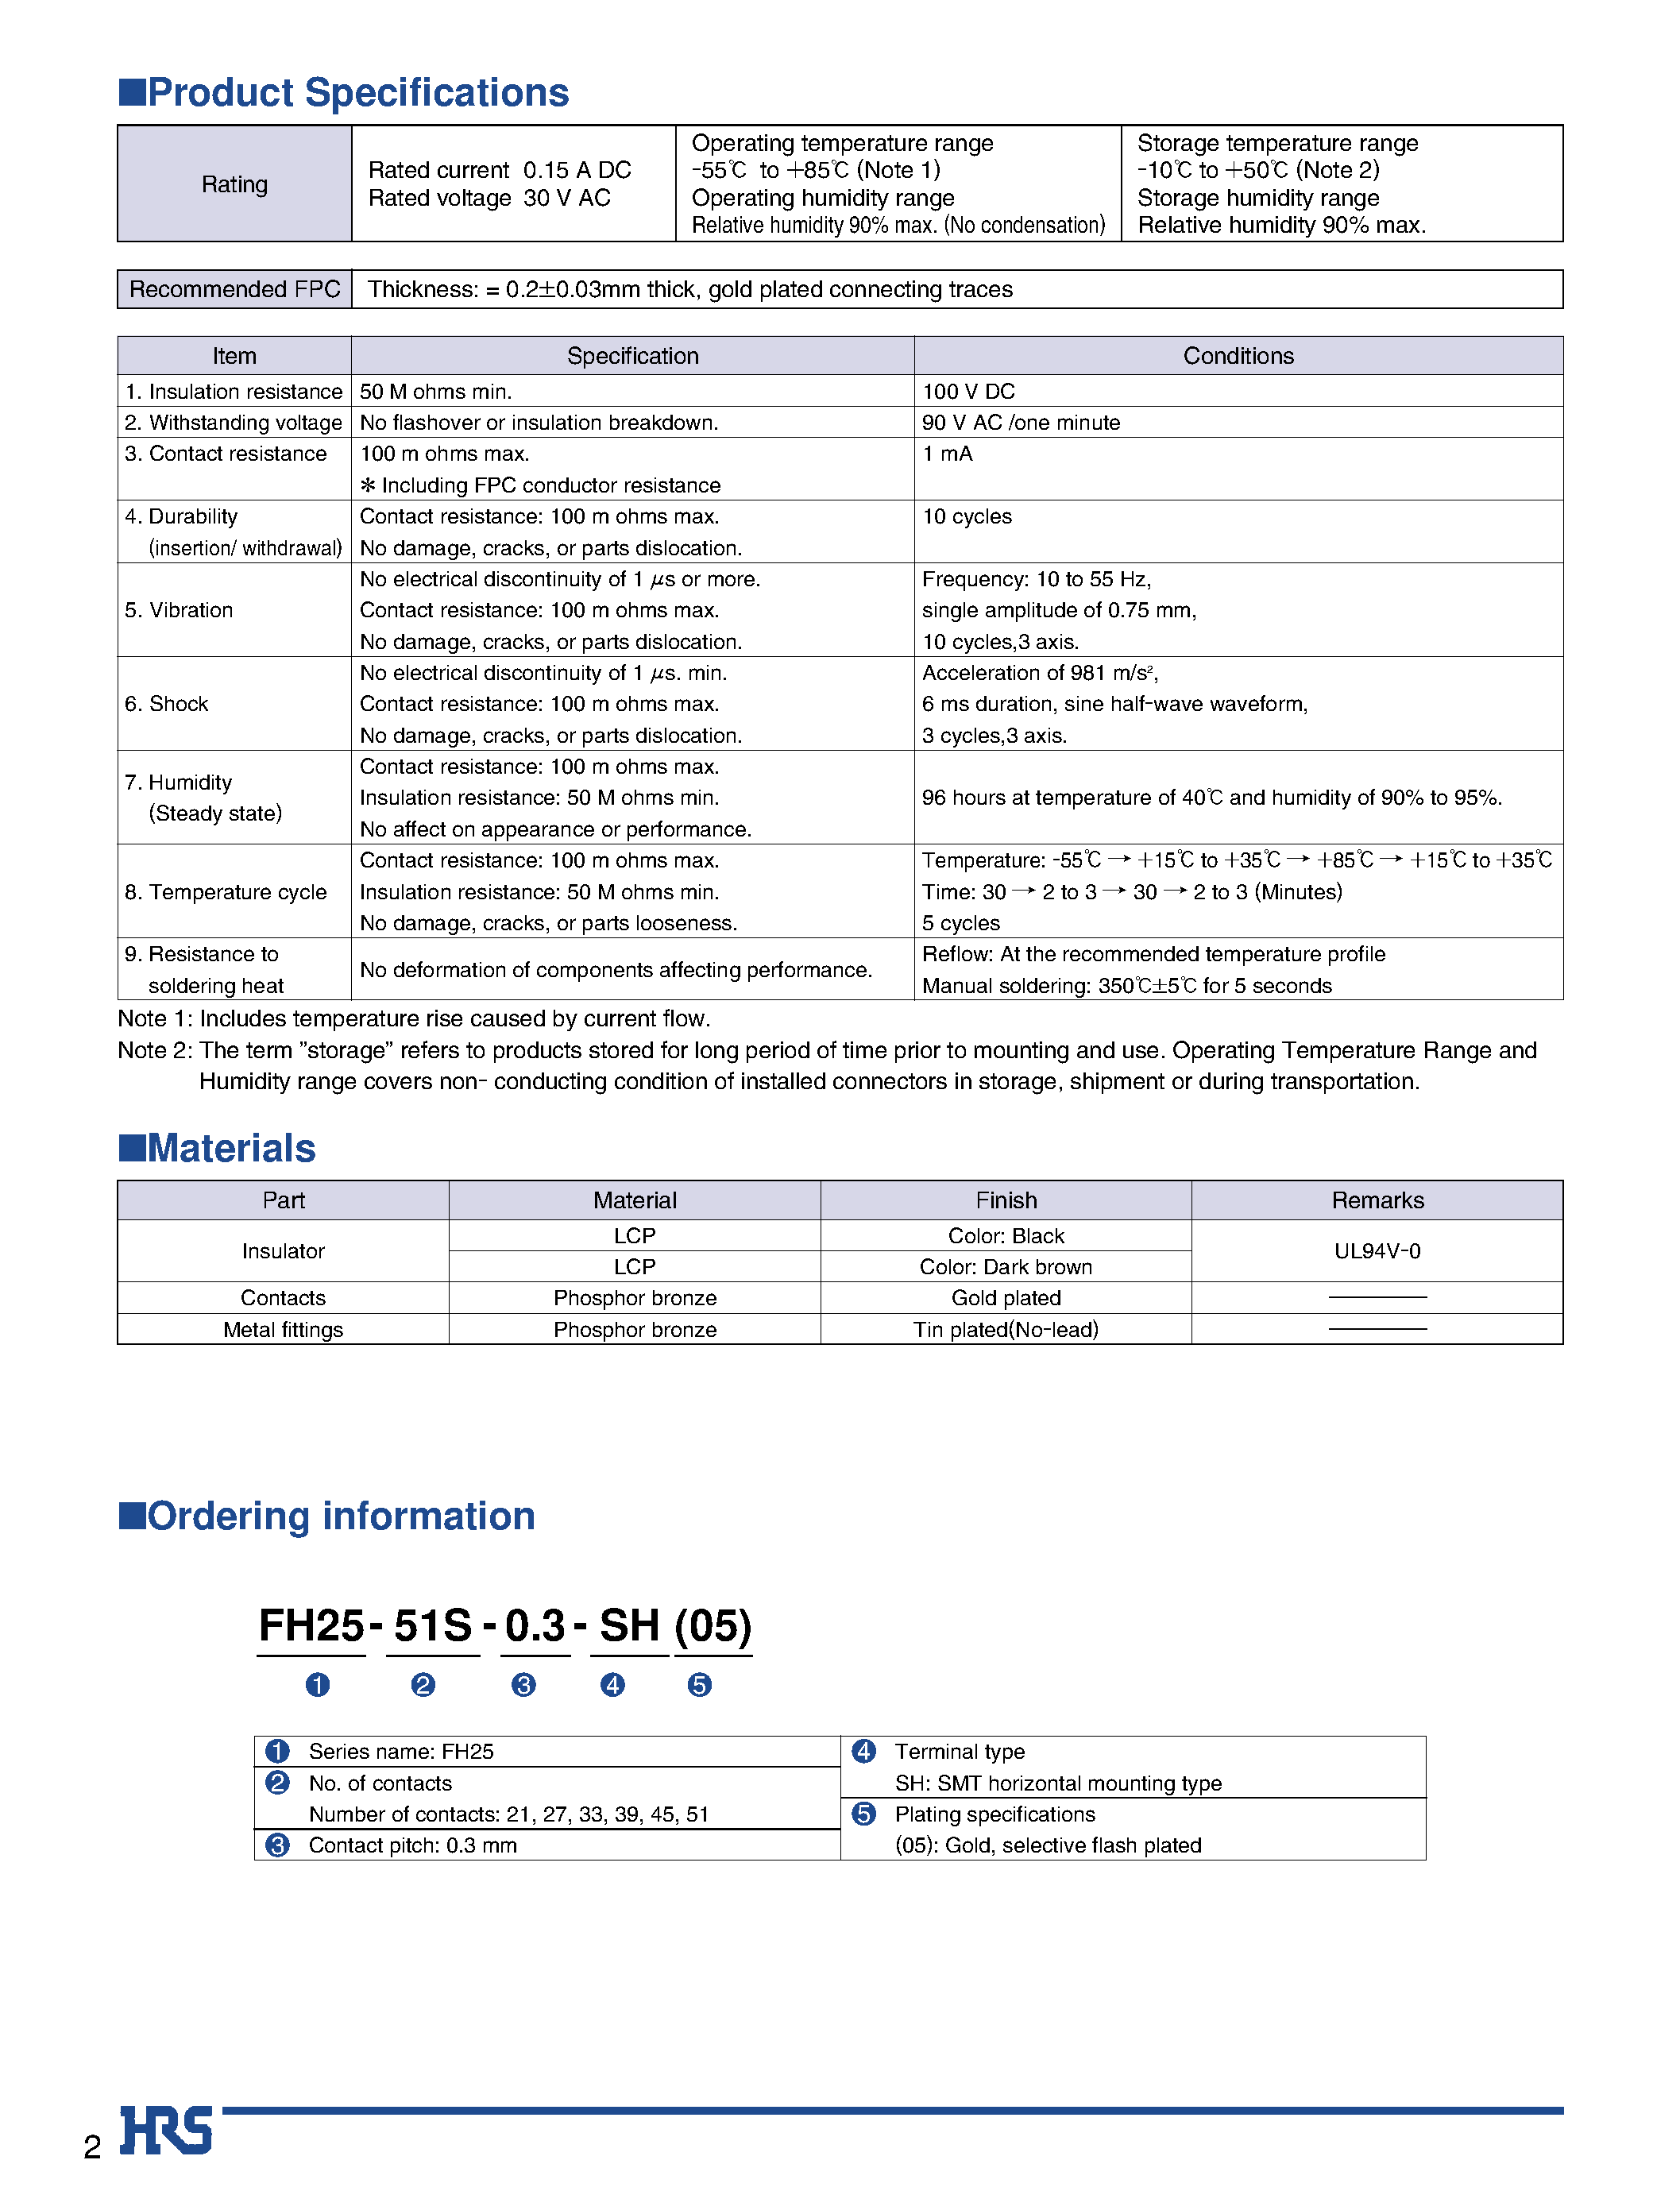 Datasheet FH25-51S-0.3SH - 0.3 mm Contact Pitch/ 0.9 mm above the board/ Flexible Printed Circuit ZIF Connectors. page 2